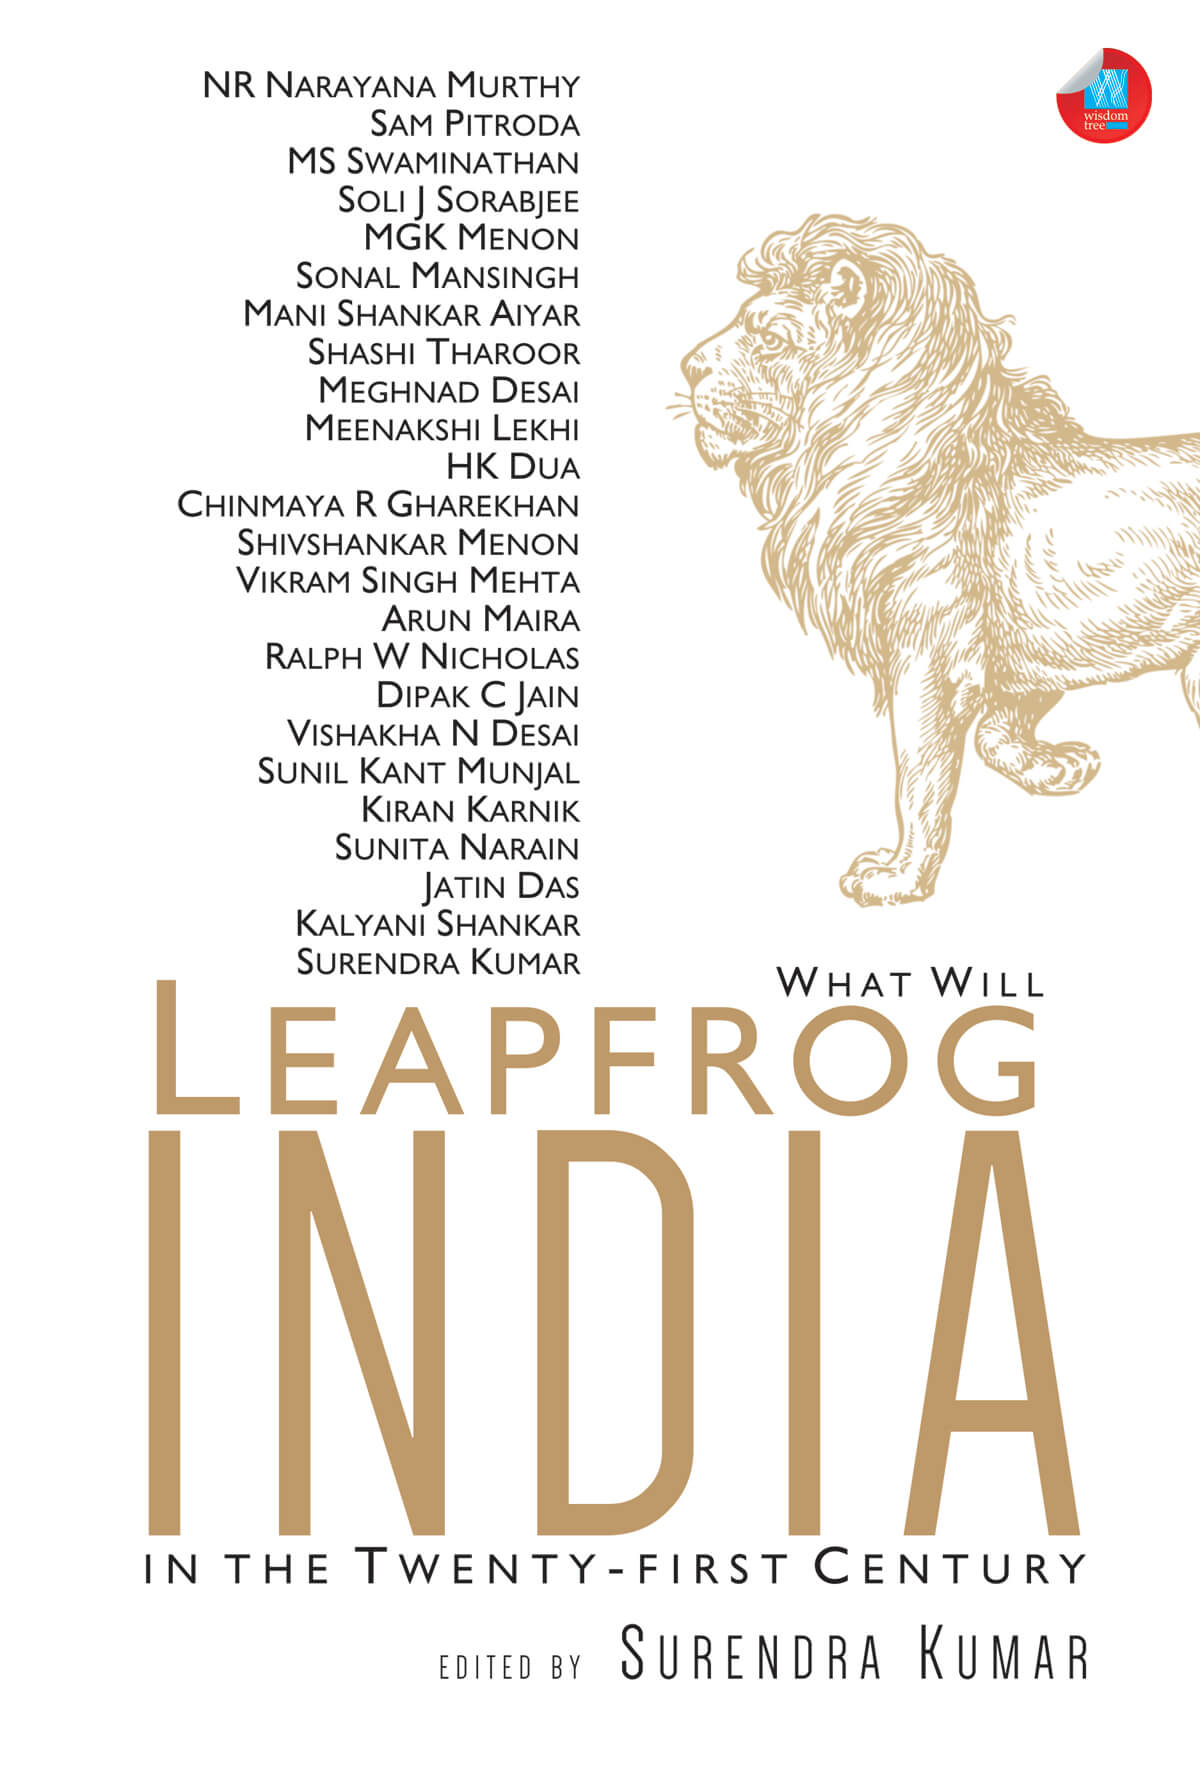 What Will Leapfrog India In The Twenty-First Century